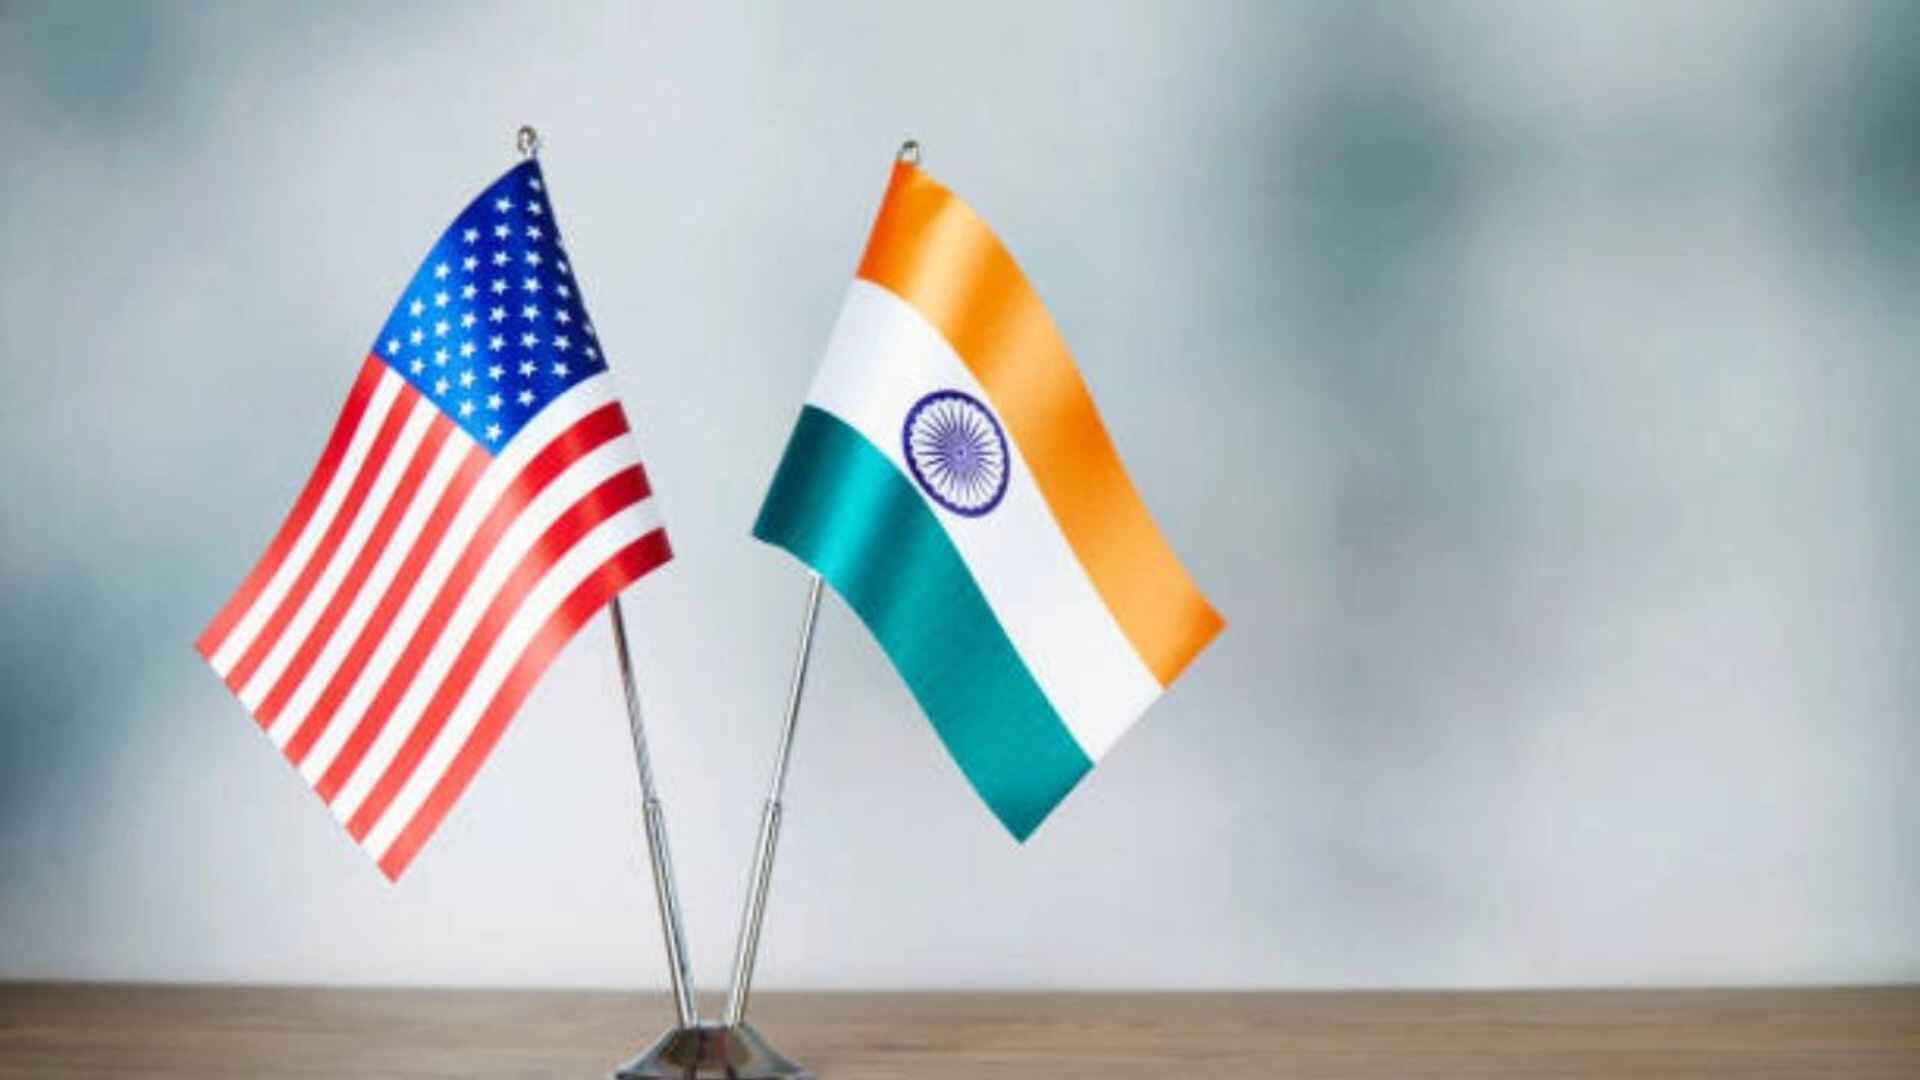 Will ‘values’ have an impact on India-US relations?